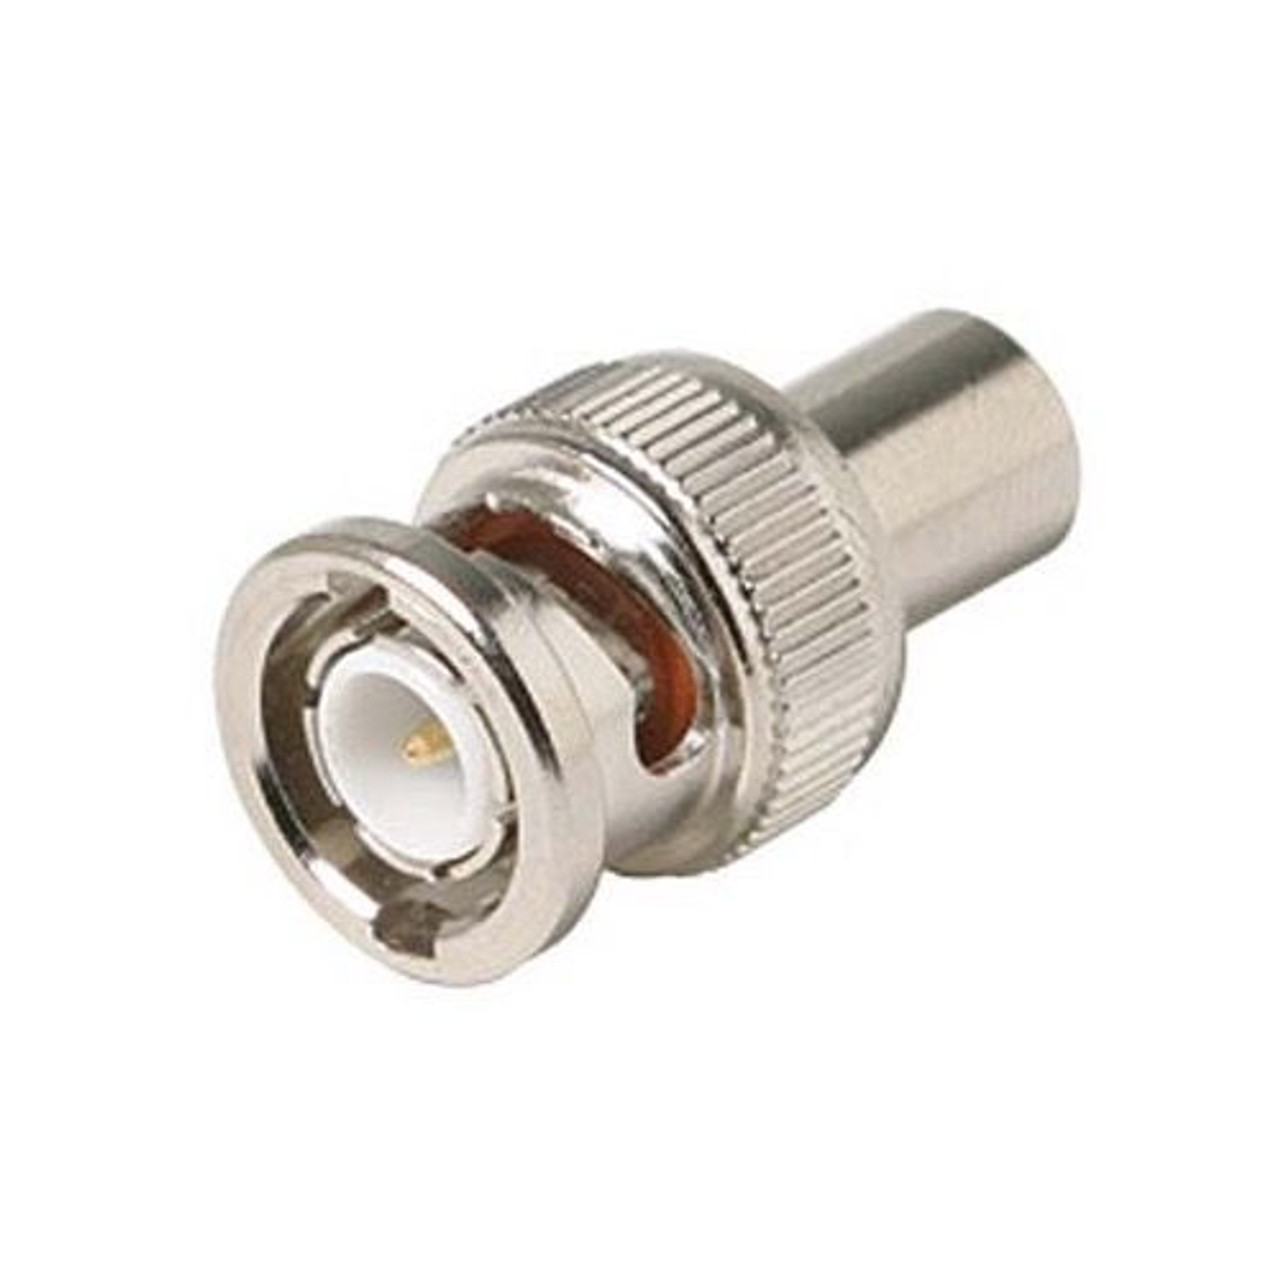 Steren 200-178 75 Ohm Male BNC Terminator 1% Adapter Commercial Grade Connector for Video and Headend Applications RF Digital Commercial Audio Video Component, Part # 200178